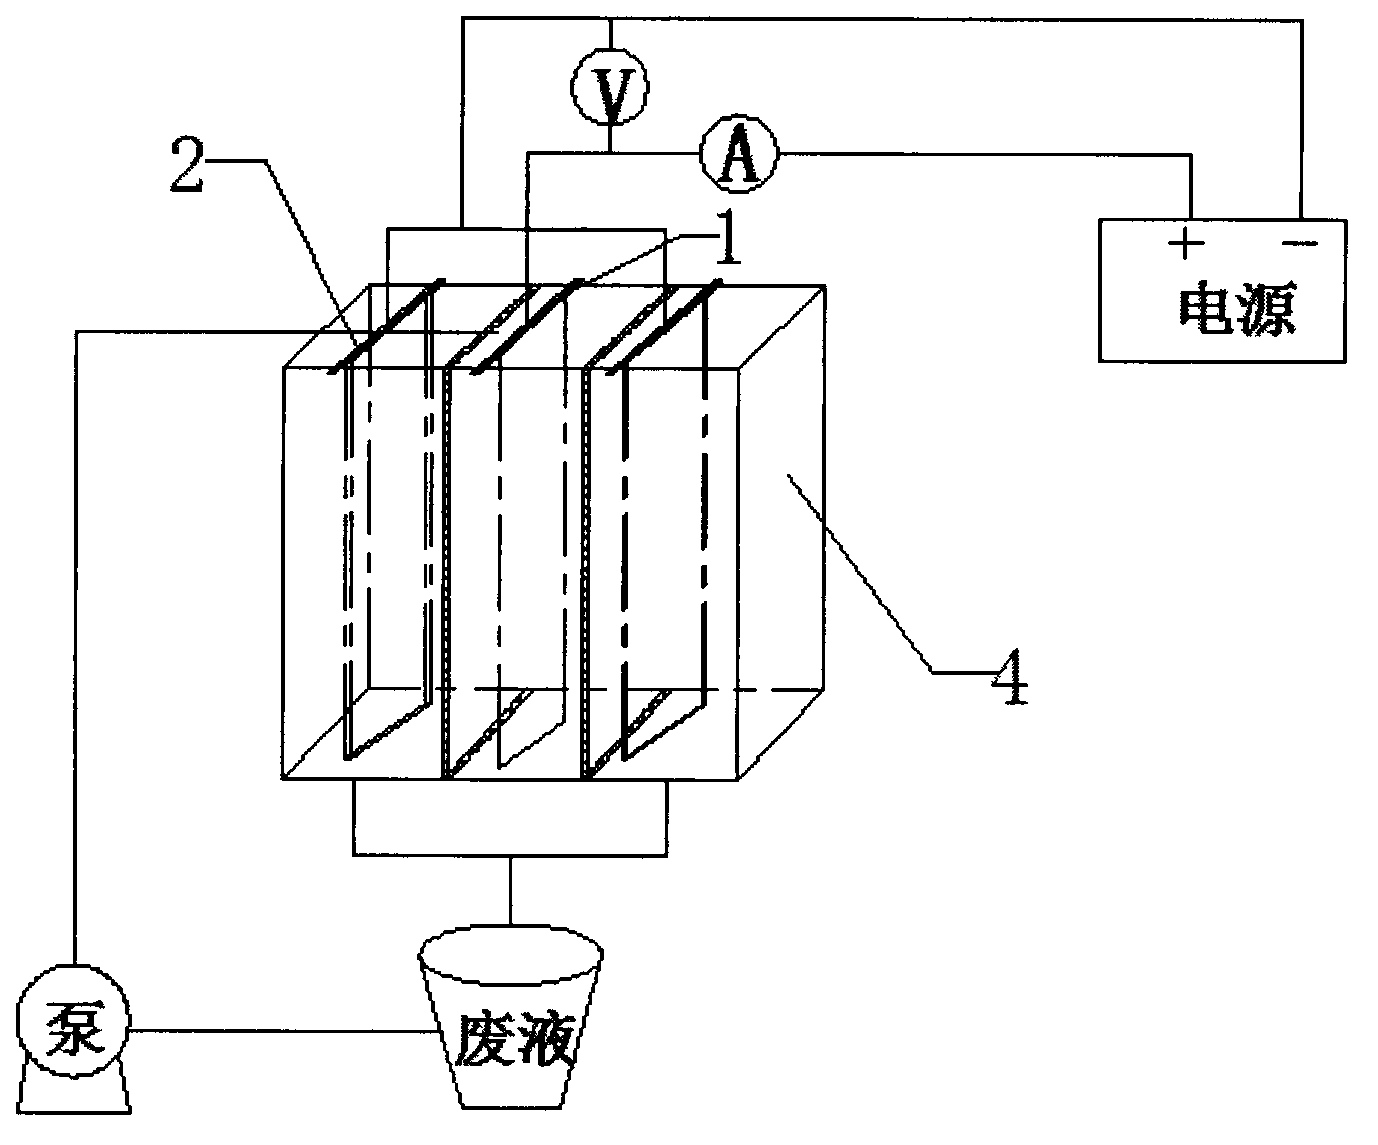 Electrochemical gold dissolving device and method